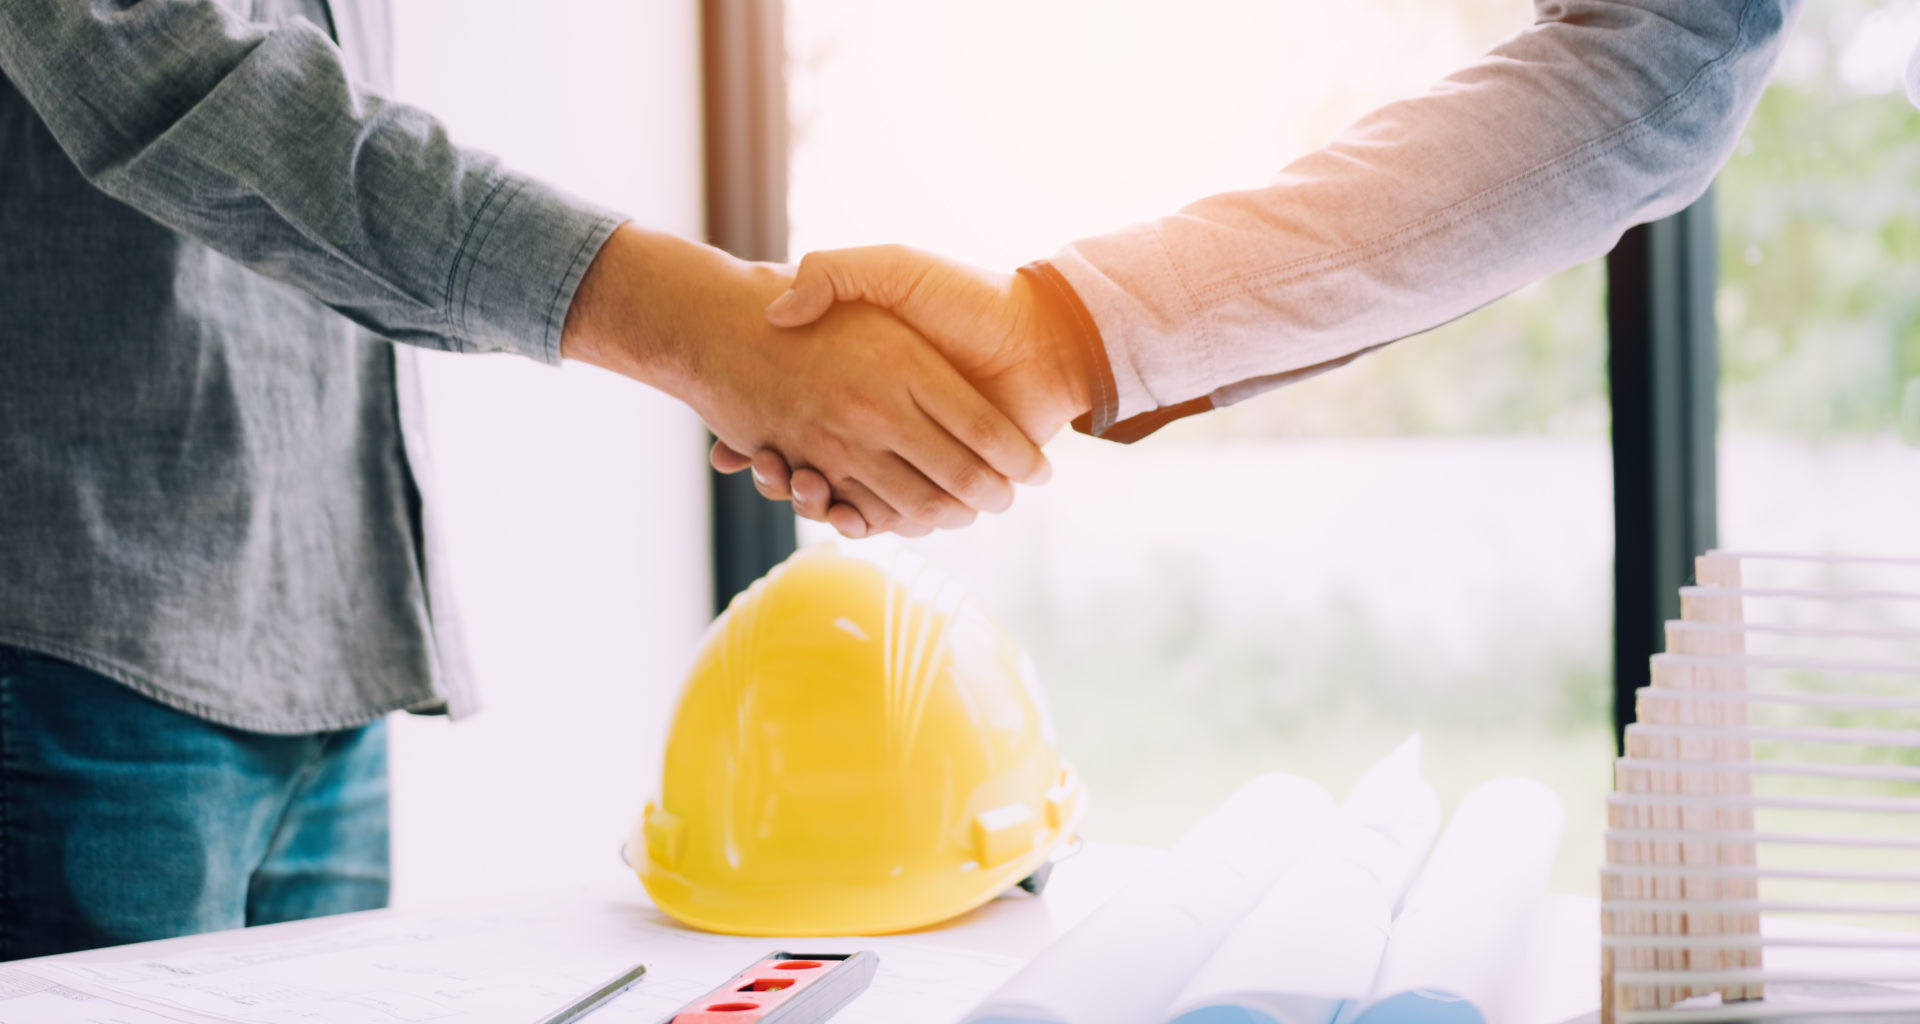 Top 12 Civil Engineer Interview Questions (with answers)-Drjobpro.com